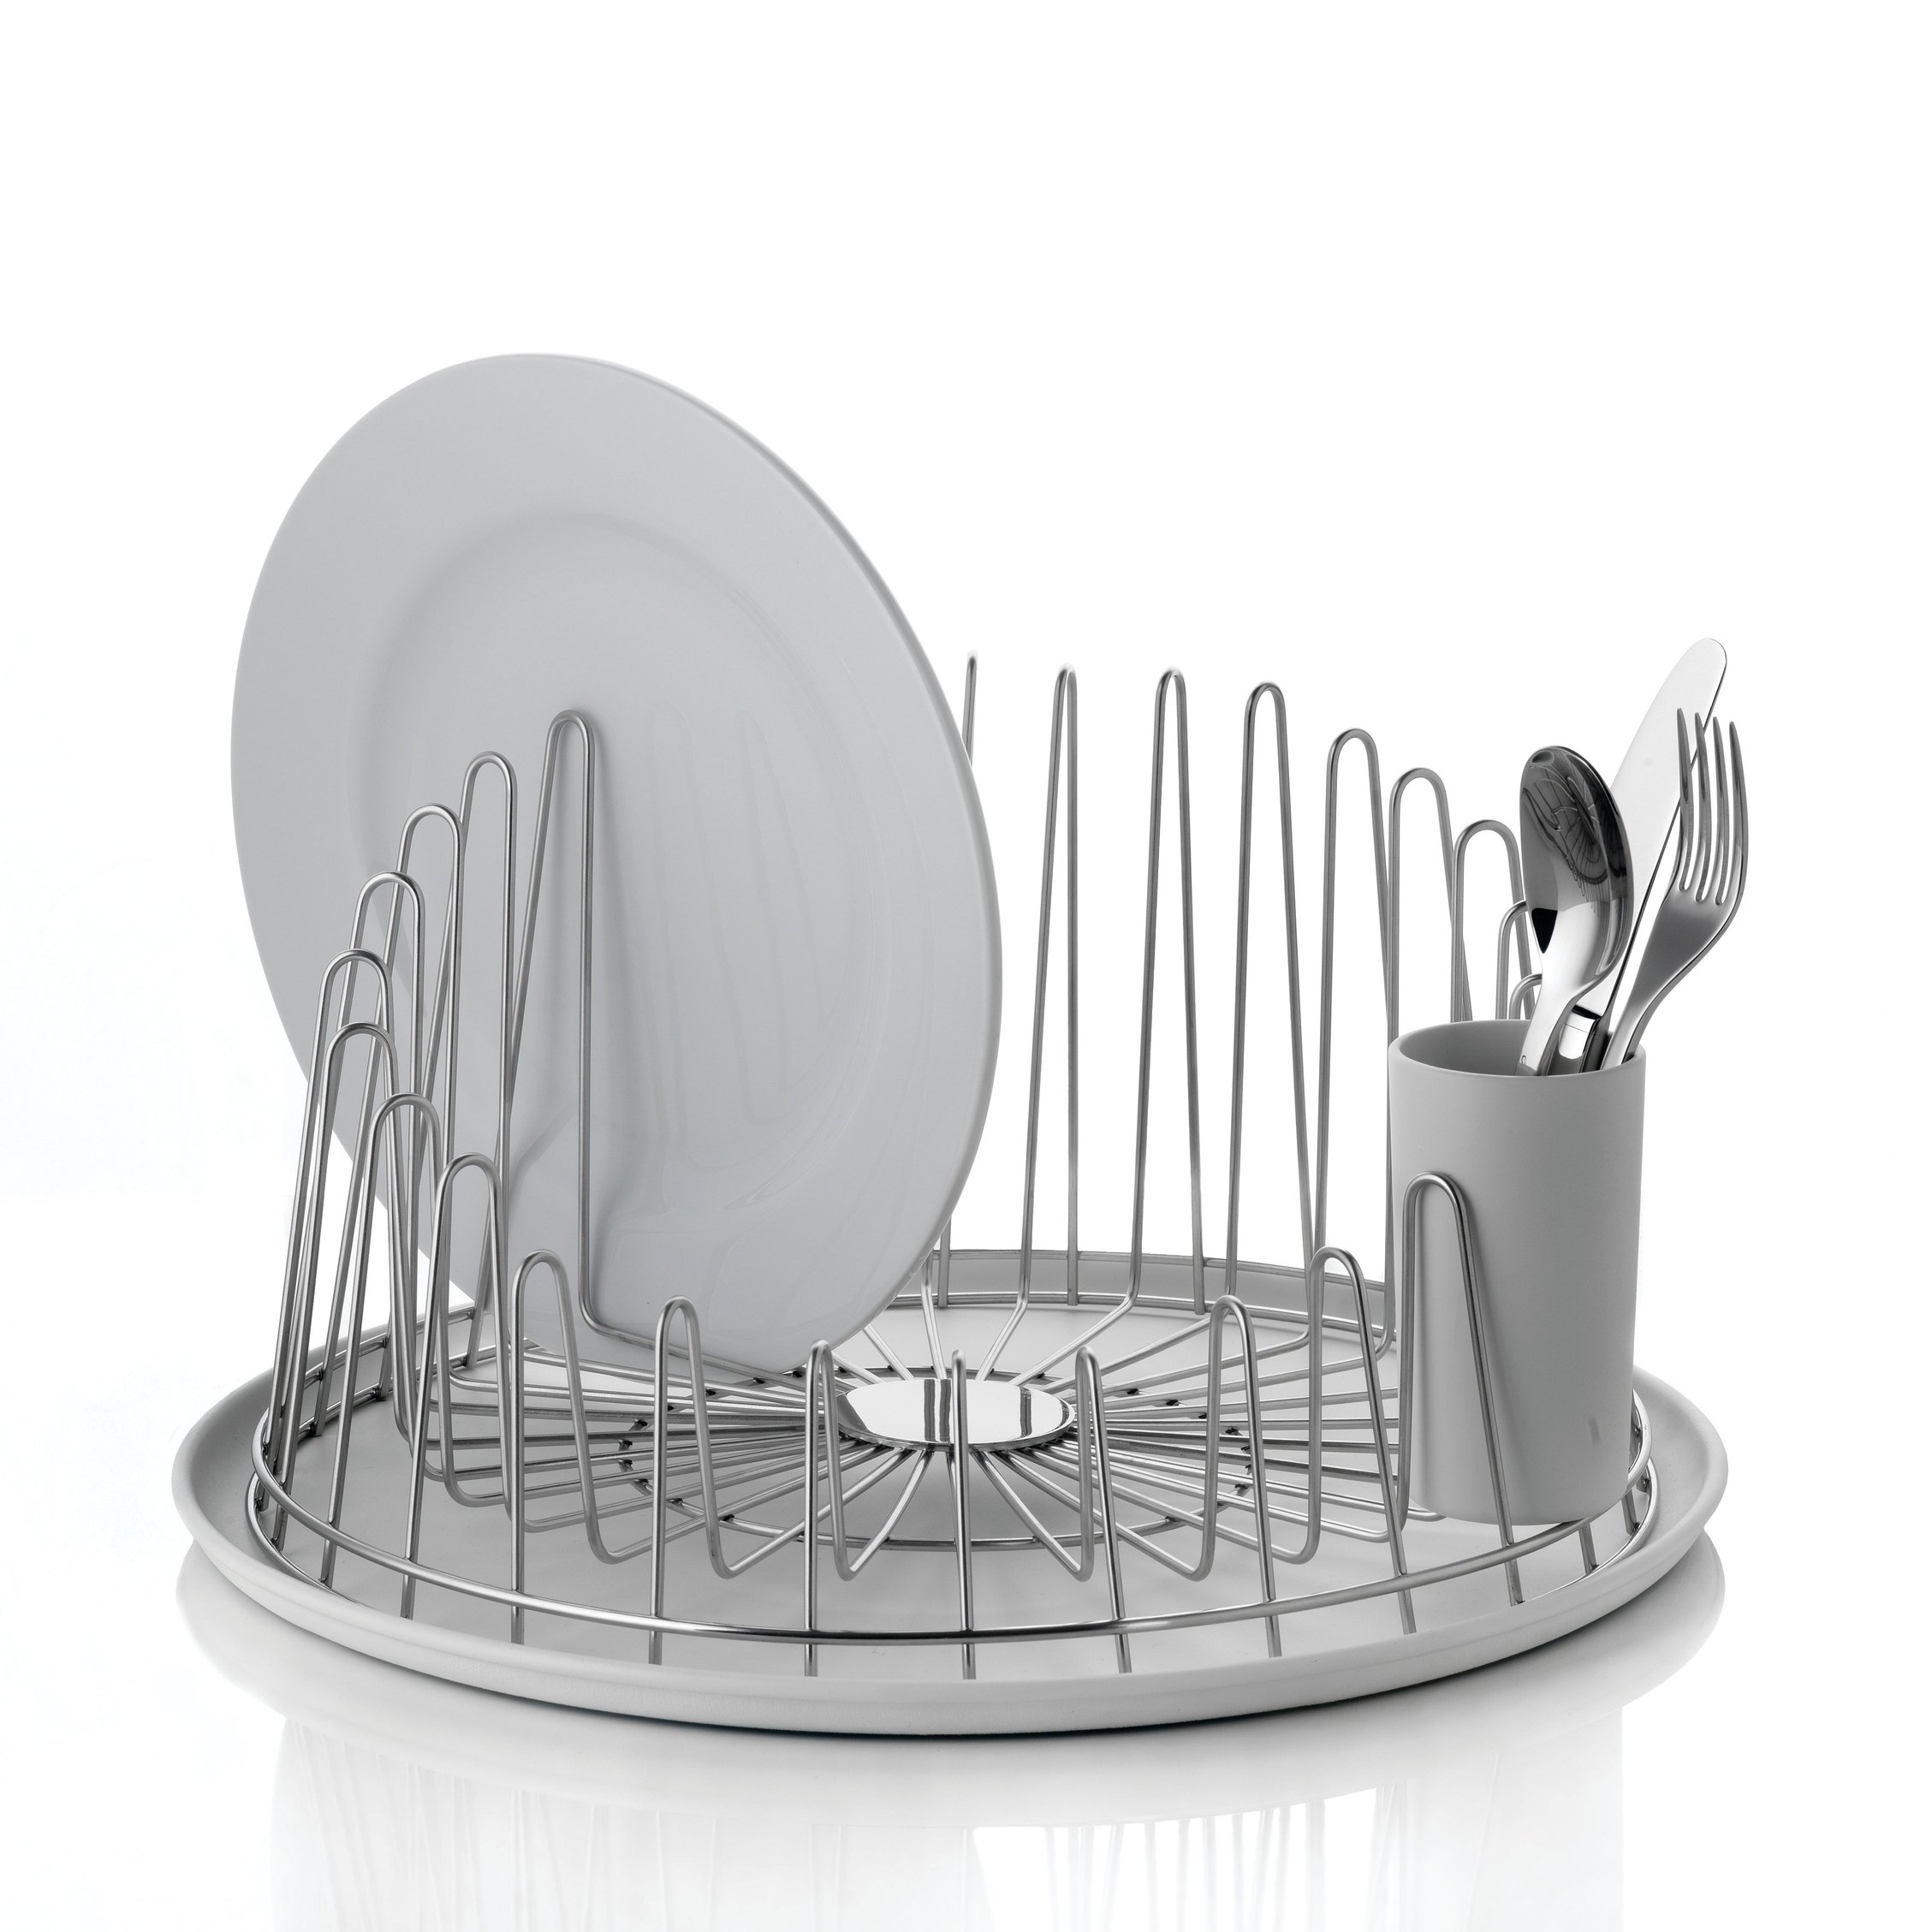 https://www.nordicnest.com/assets/blobs/alessi-a-tempo-dish-rack-stainless-steel/p_27320-01-02-526f4bfea6.jpg